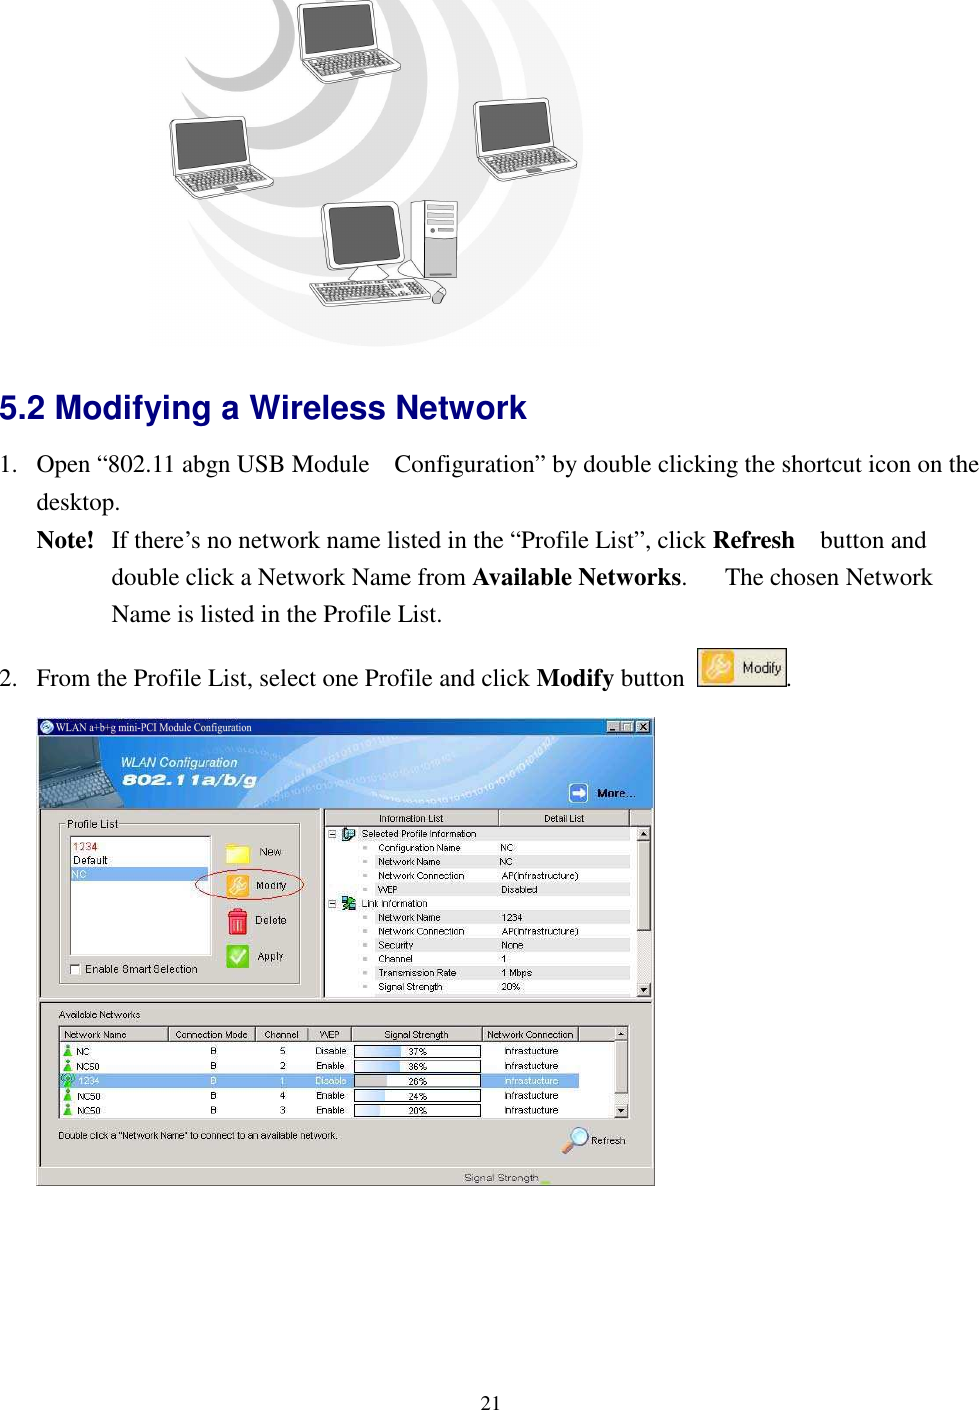   21 5.2 Modifying a Wireless Network   1. Open “802.11 abgn USB Module    Configuration” by double clicking the shortcut icon on the desktop.     Note!   If there’s no network name listed in the “Profile List”, click Refresh    button and double click a Network Name from Available Networks.      The chosen Network Name is listed in the Profile List. 2. From the Profile List, select one Profile and click Modify button  .   